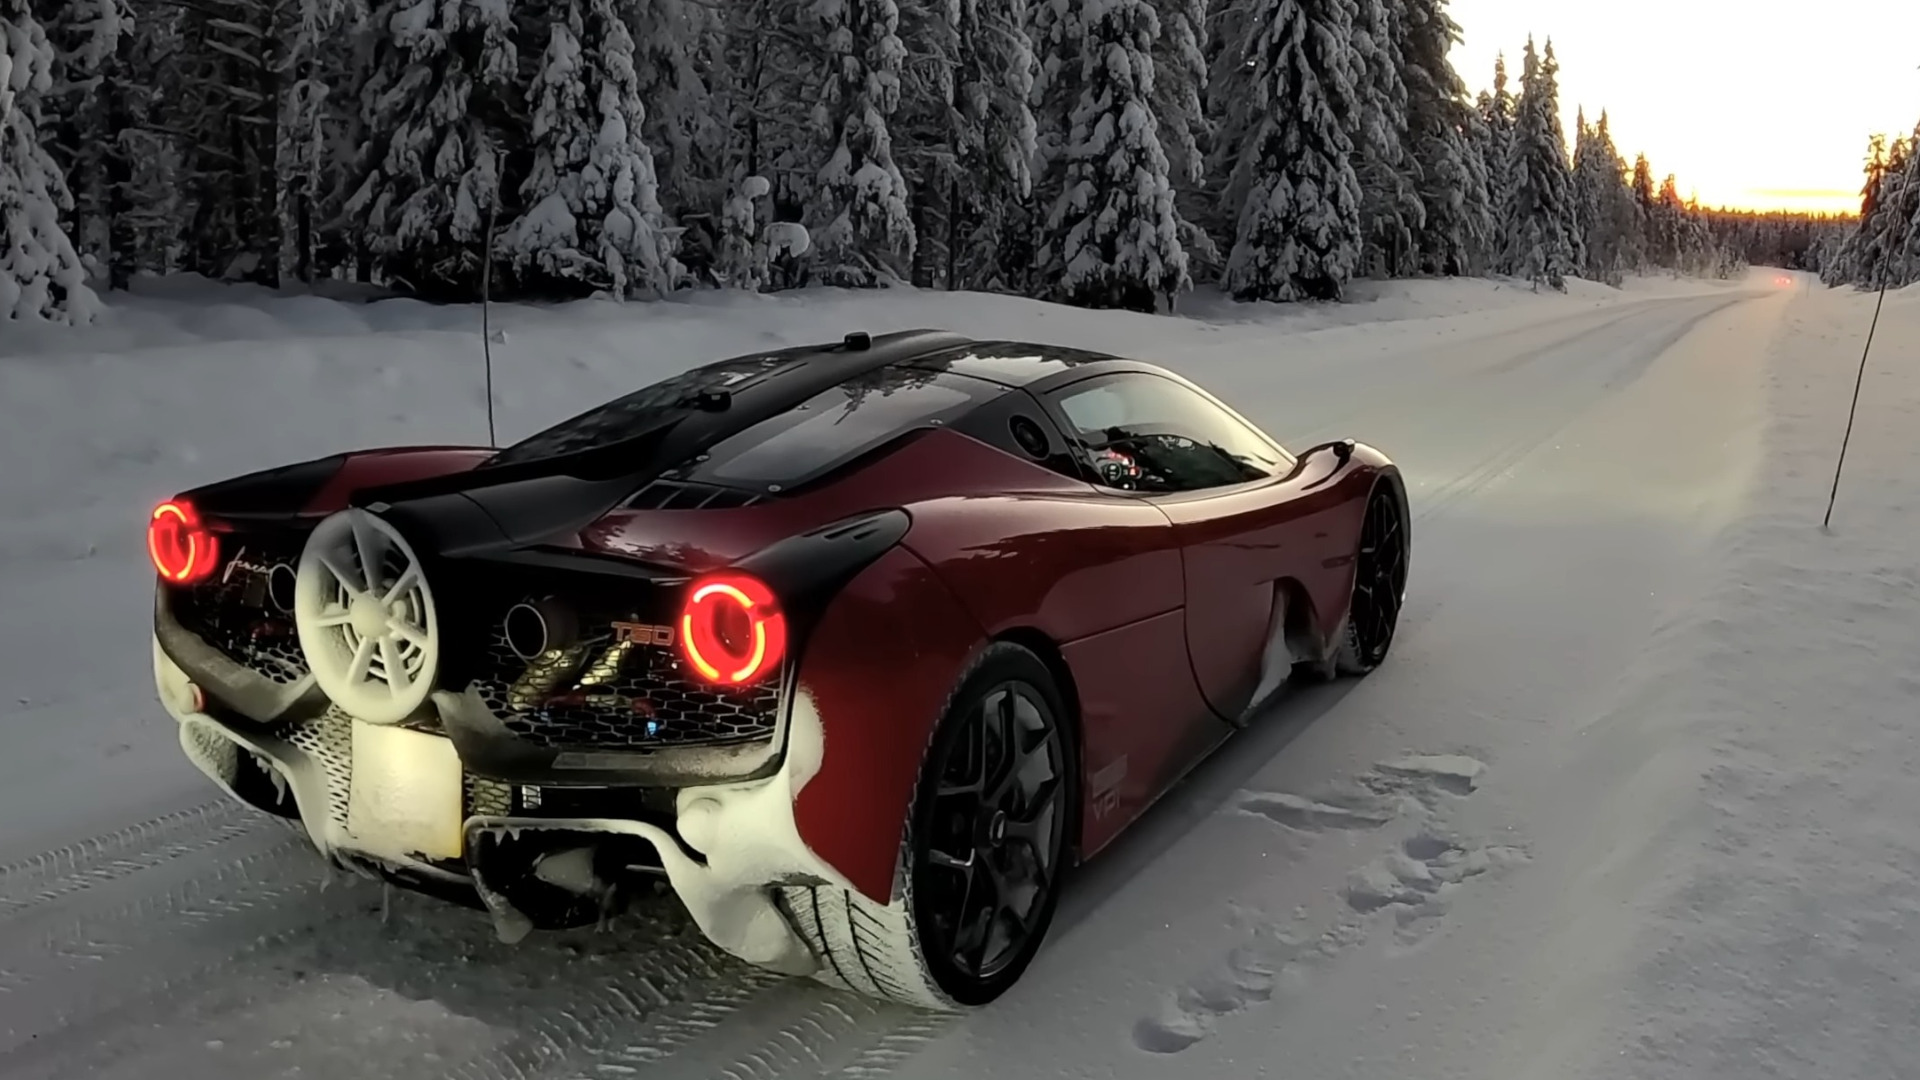 Gordon Murray's T.50 V12 Supercar Loves Playing in the Snow